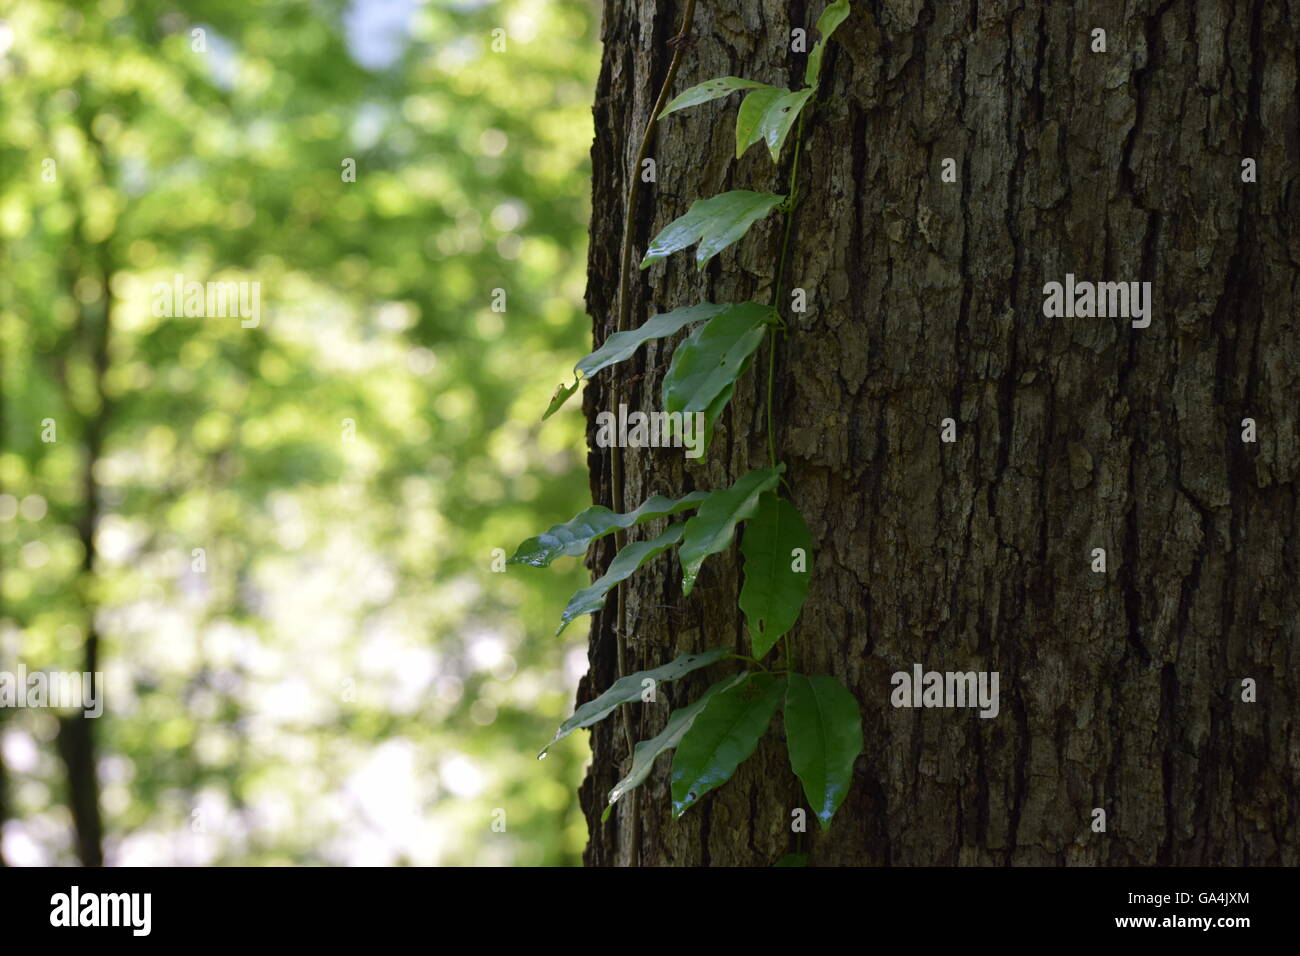 Vine climbs a tree in a forest Stock Photo